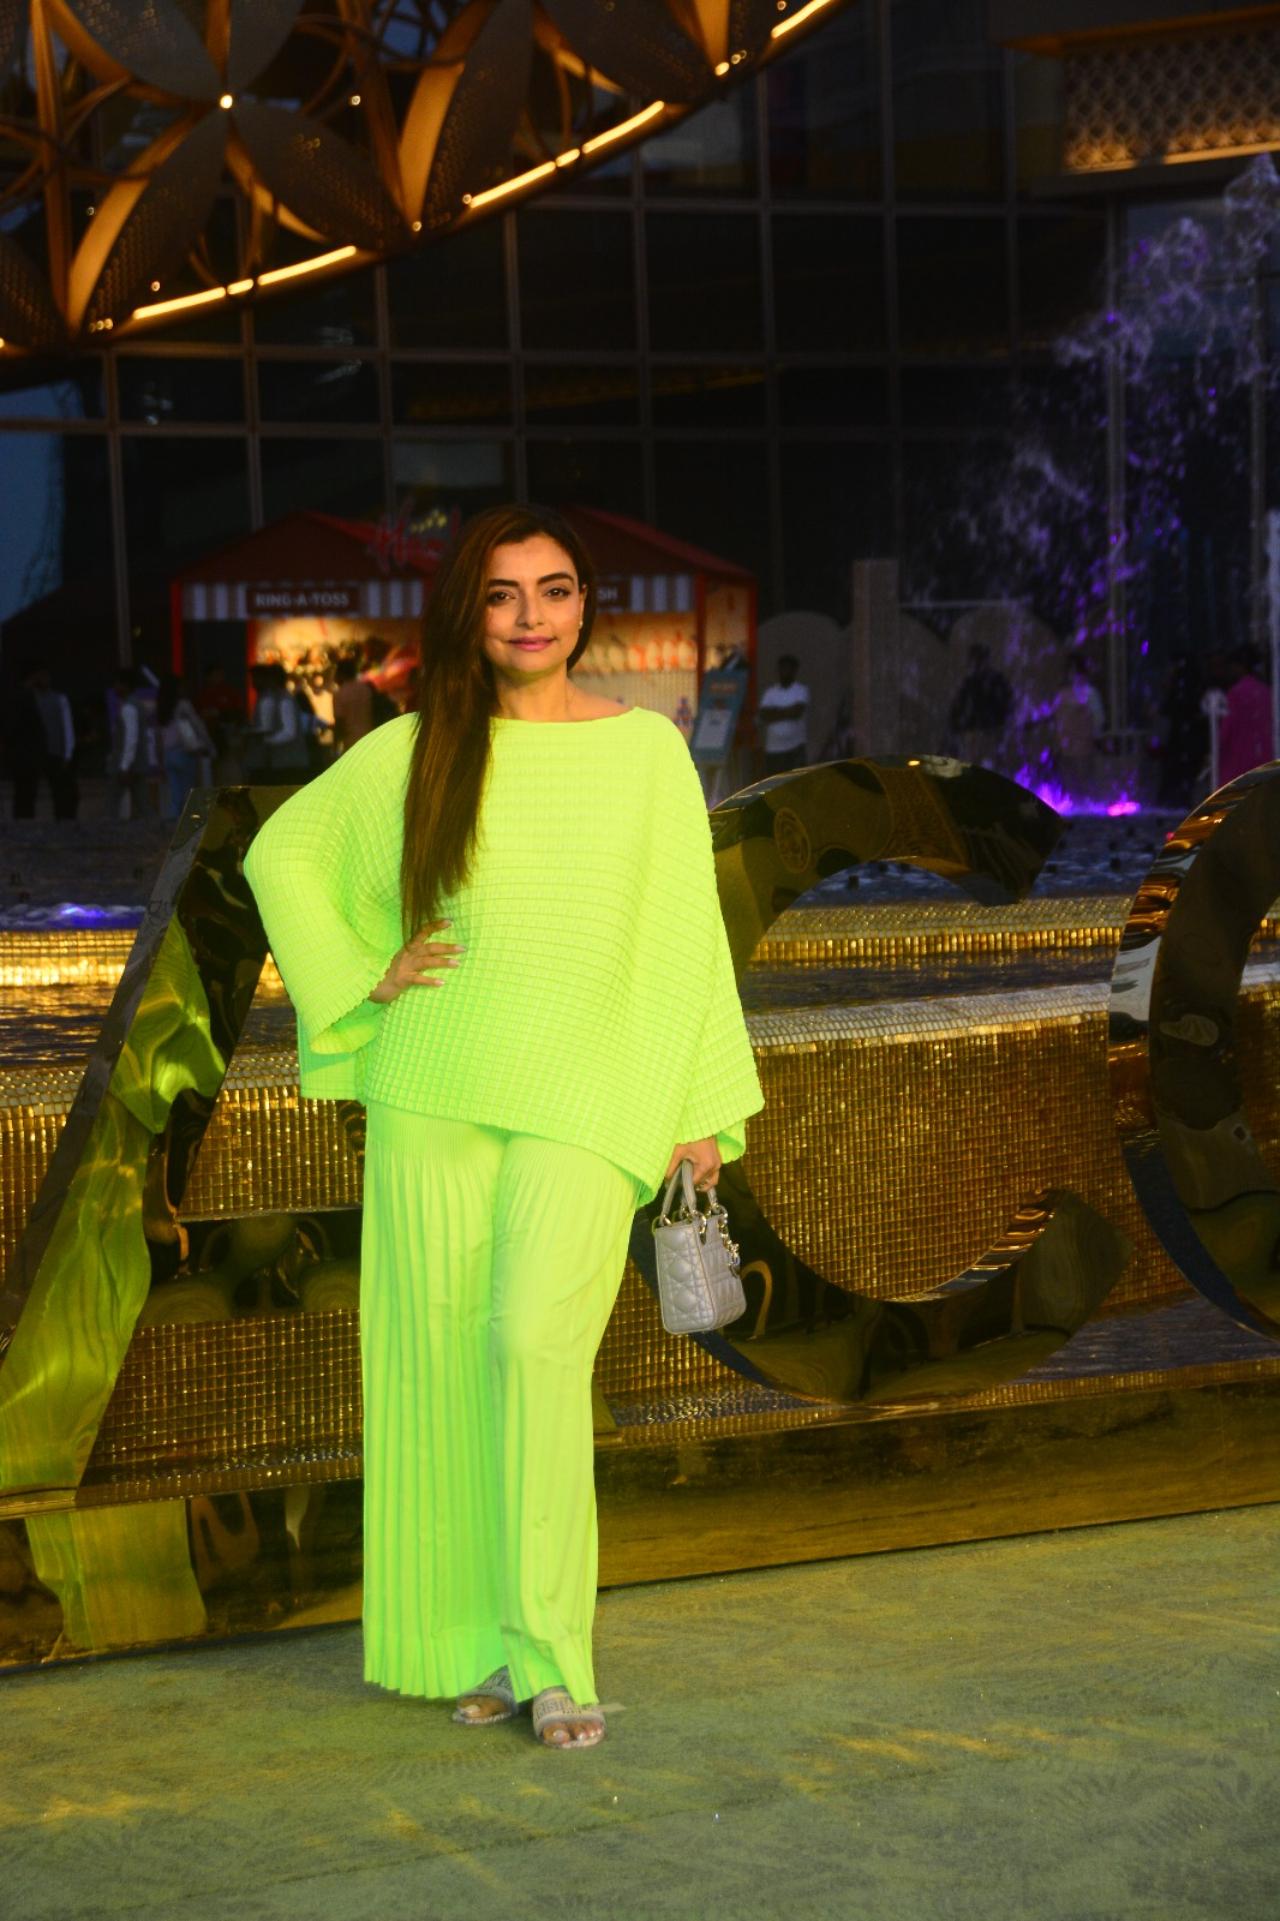 Vaibhavi Merchant was glowing in a neon green outfit. The choreographer had choreographed the opening night event of NMACC last month